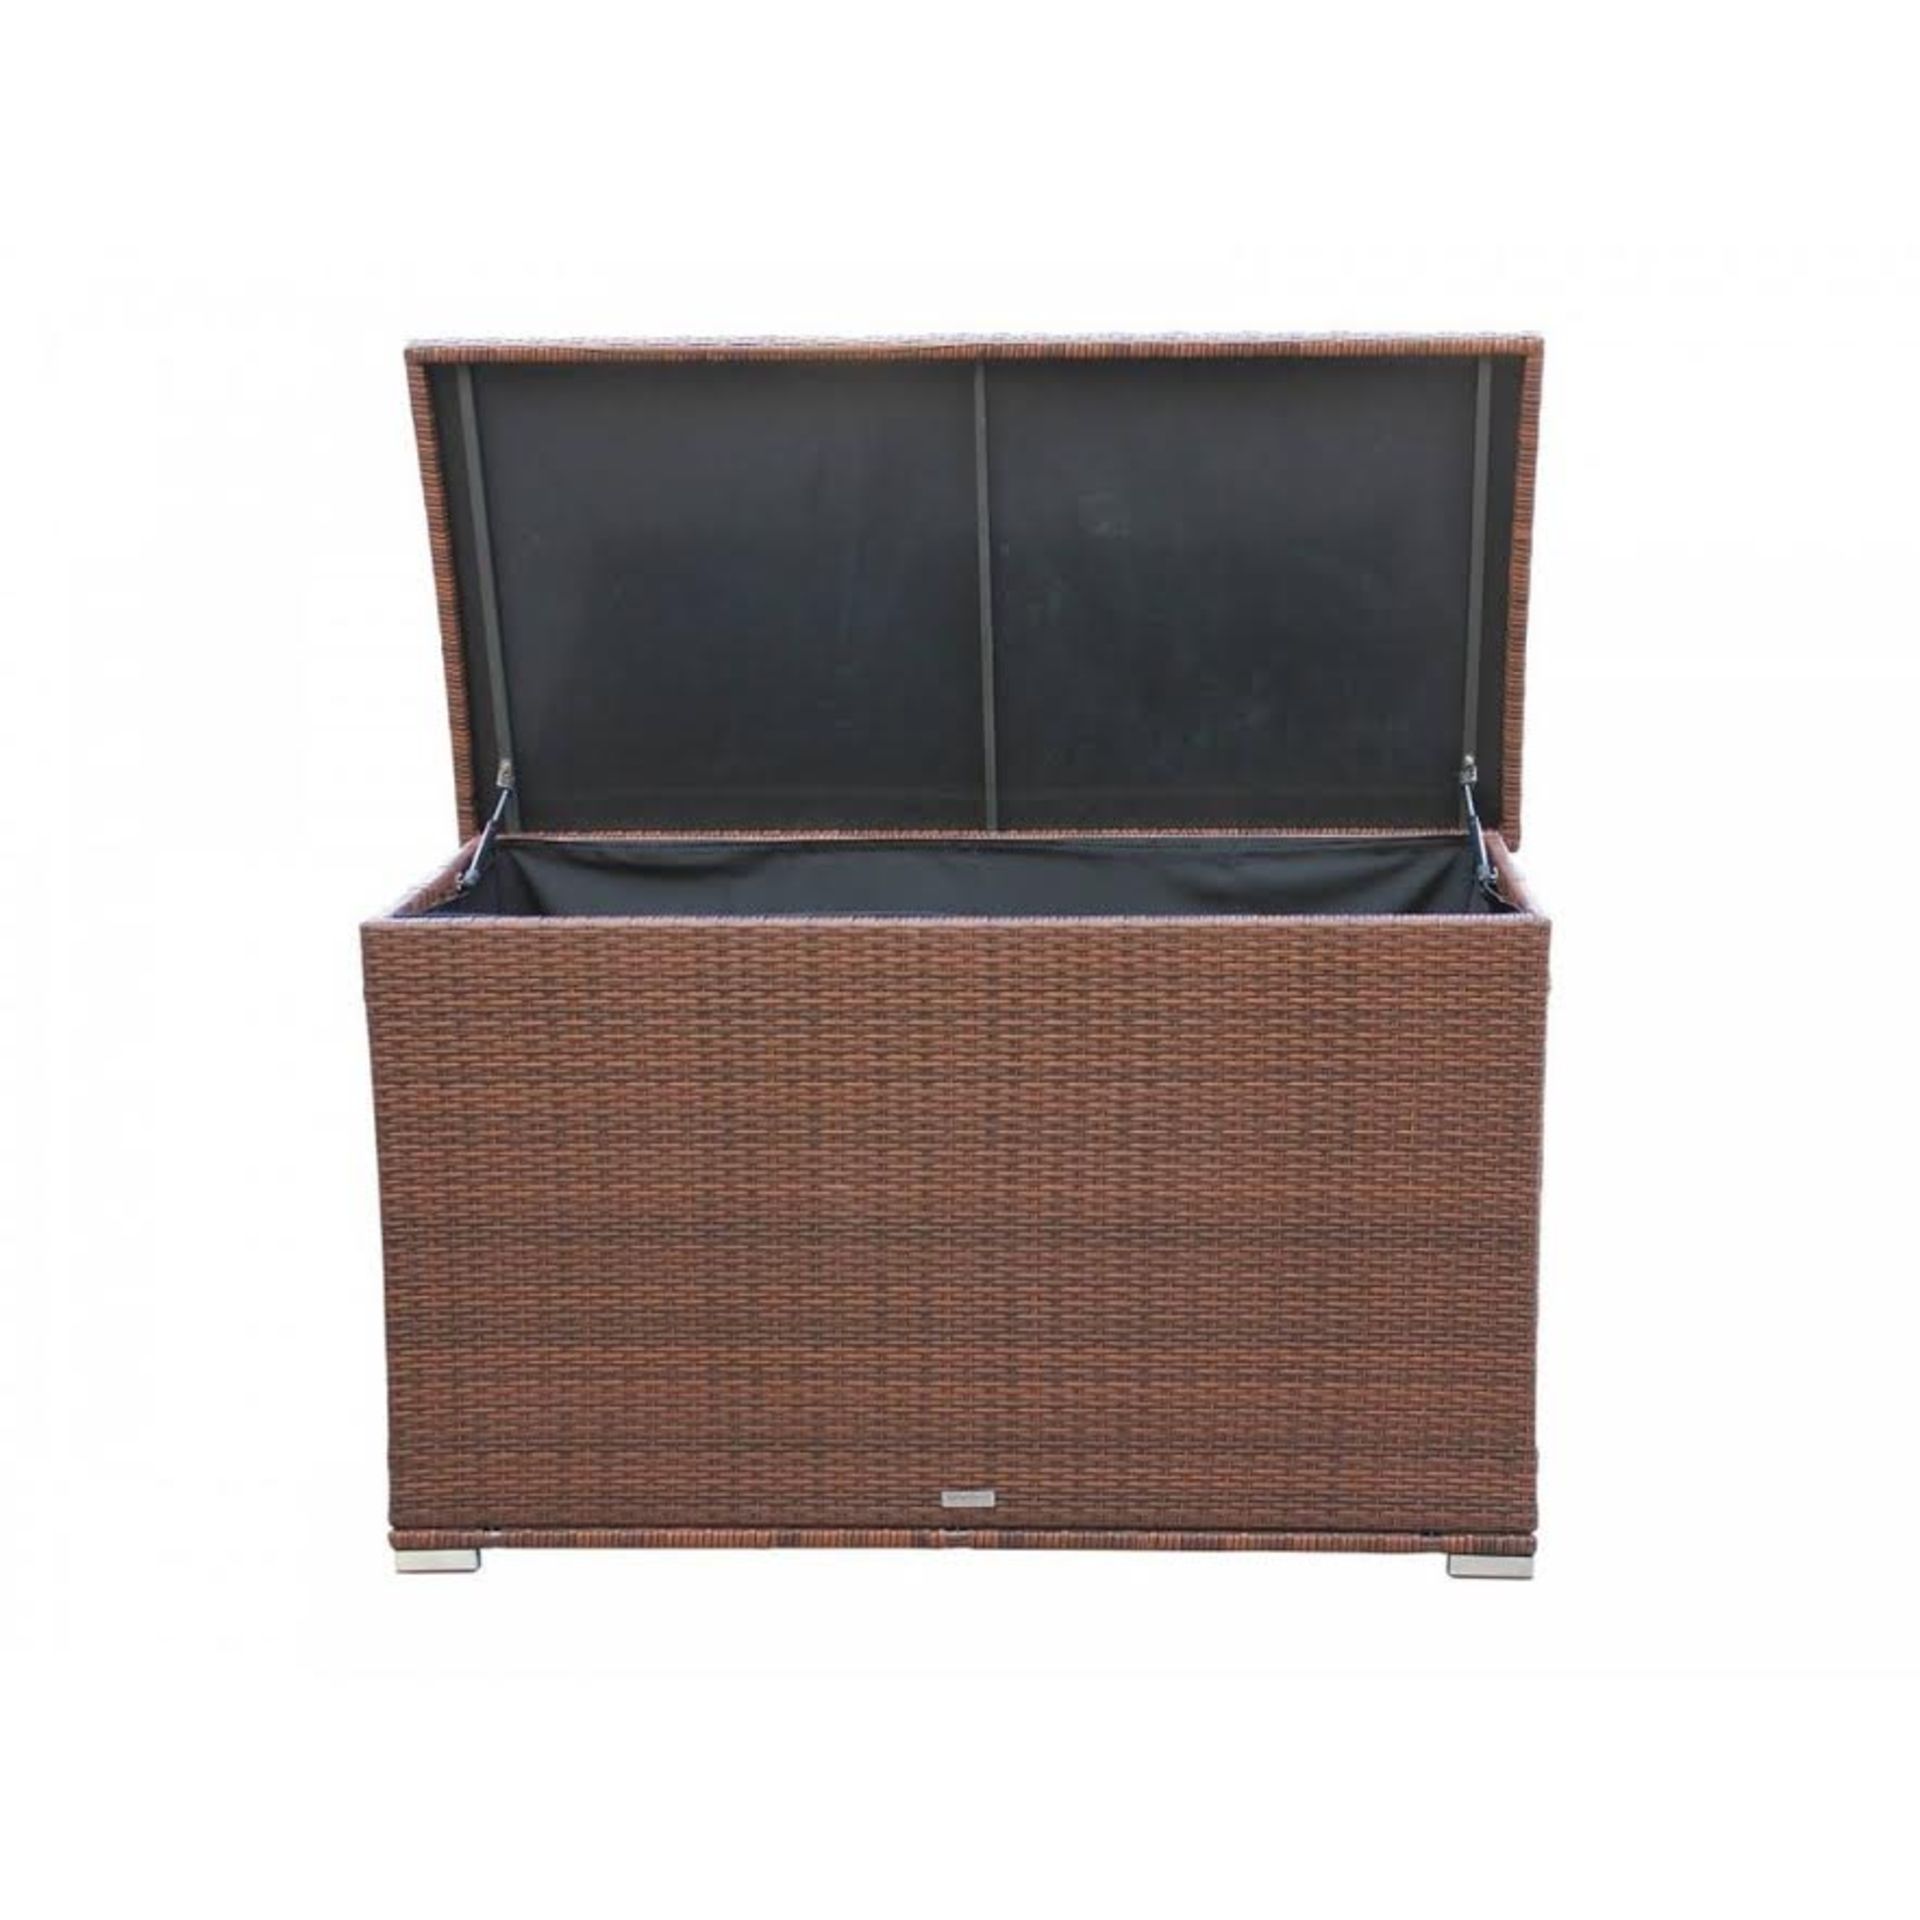 Brand New Luxury Storage Box. Gorgeous all-weather rattan storage box. Ideal for storing your garden